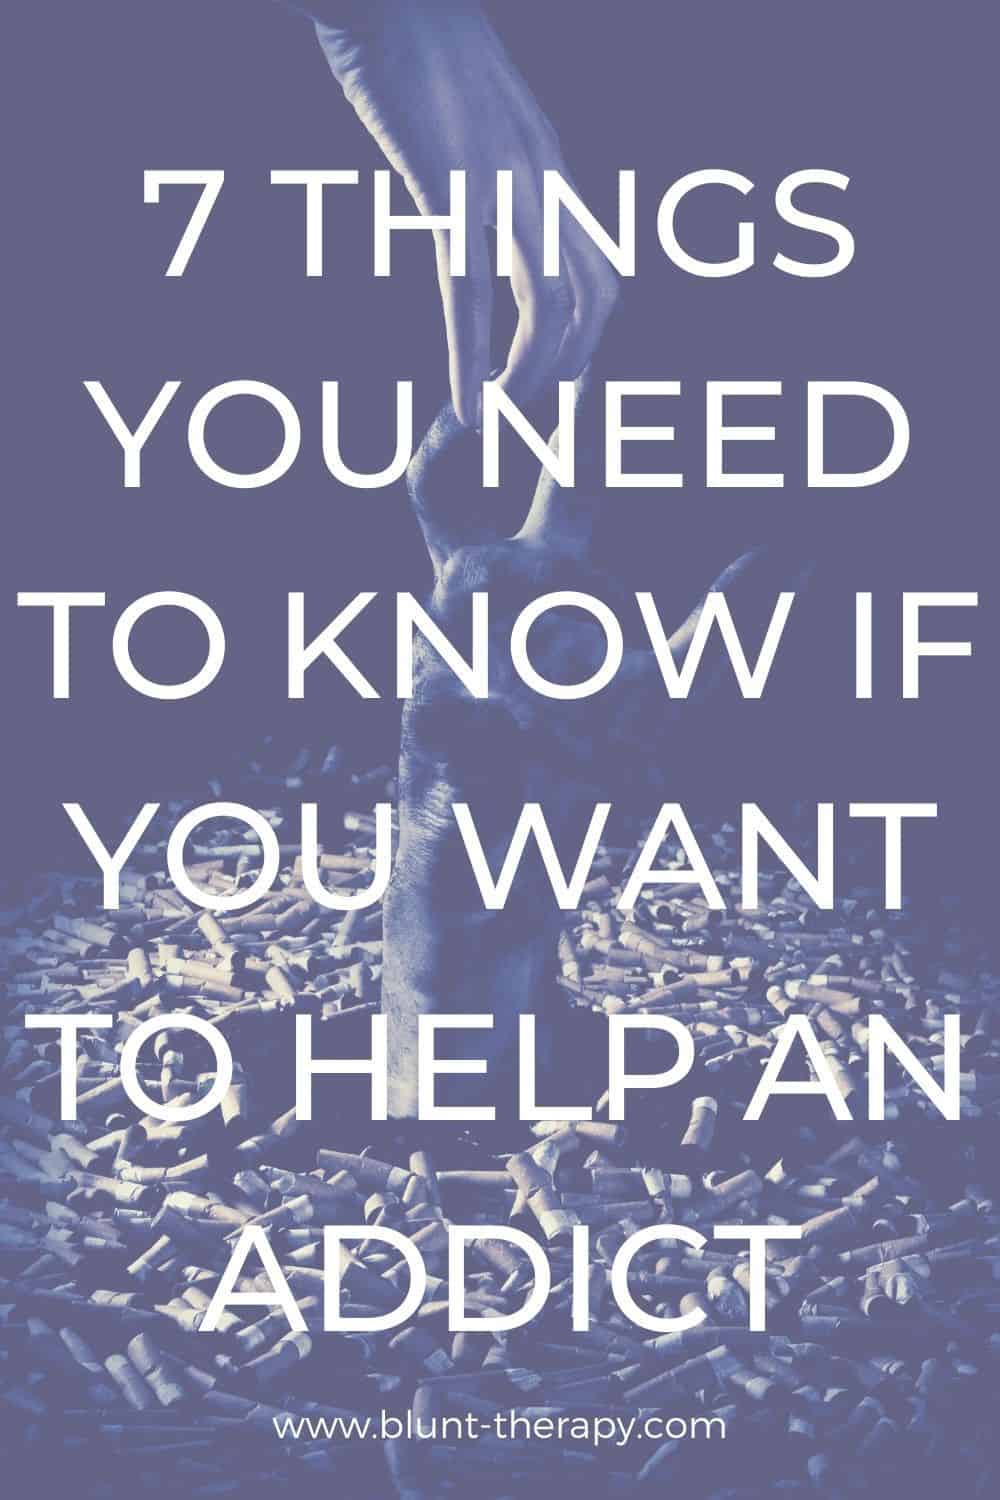 7 Things You Need To Know If You Want To Help An Addict